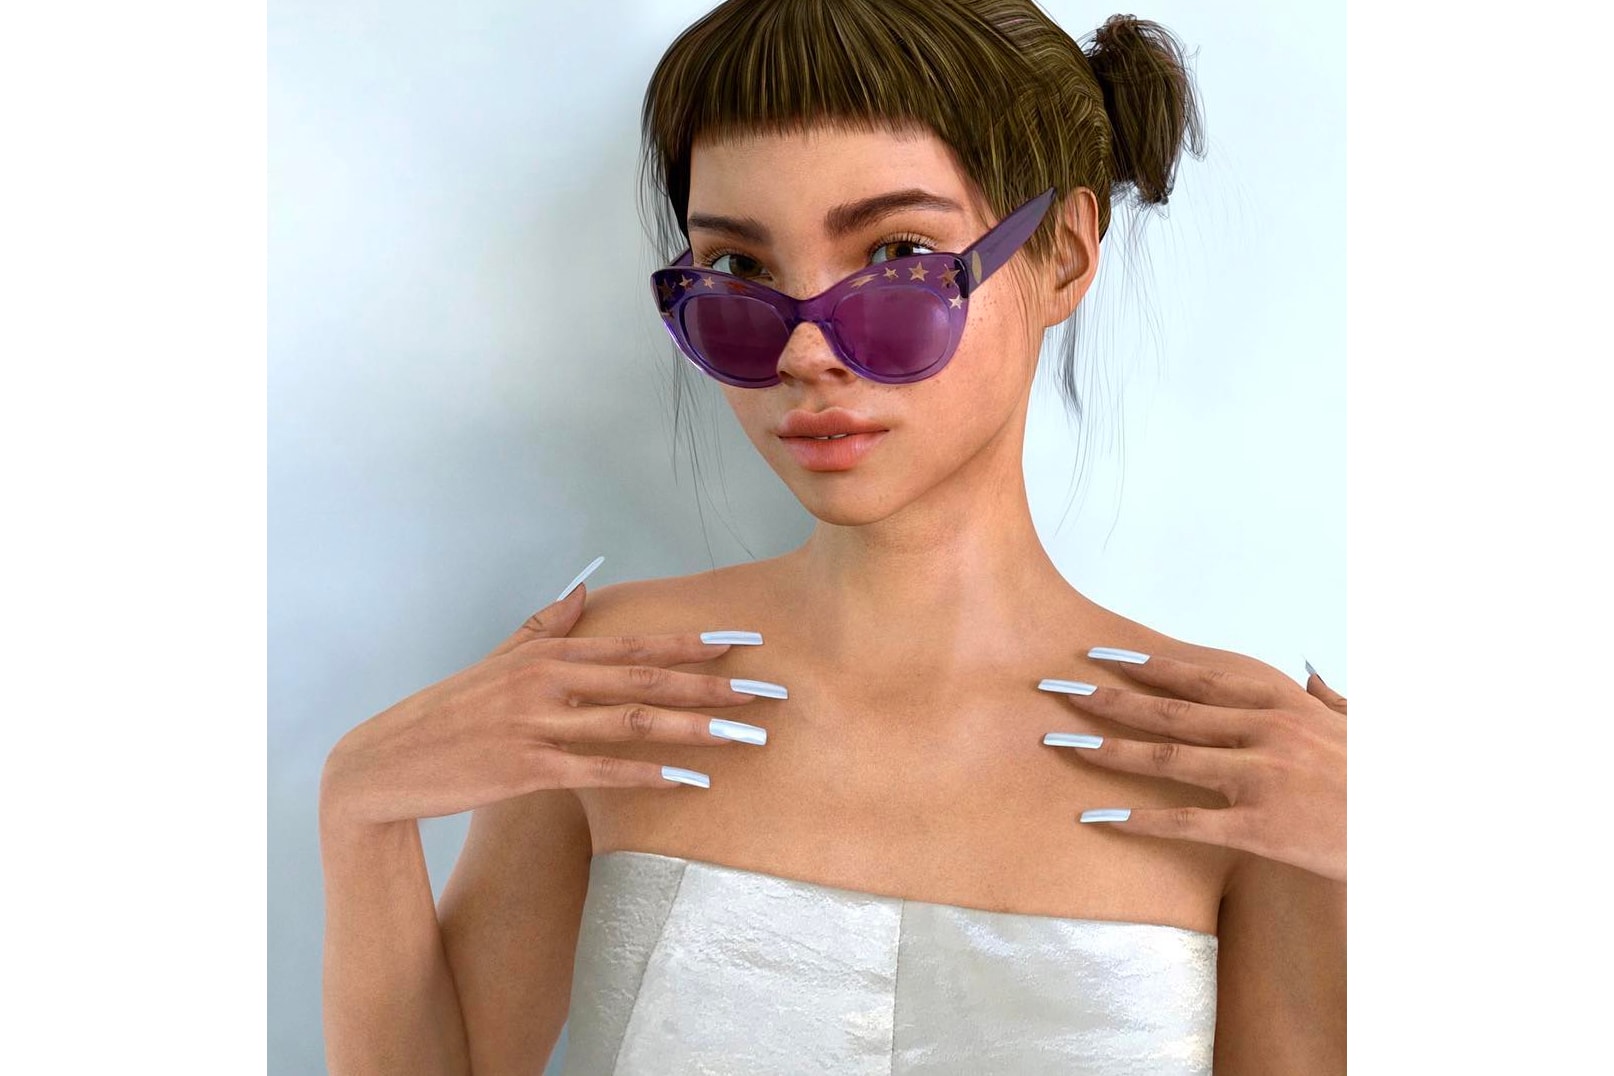 Lil Miquela Sousa Fashion First Virtual Instagram Influencer Computer Generated Chanel Prada Supreme Streetwear Style Star Spotify Knorts Converse Bot Robot